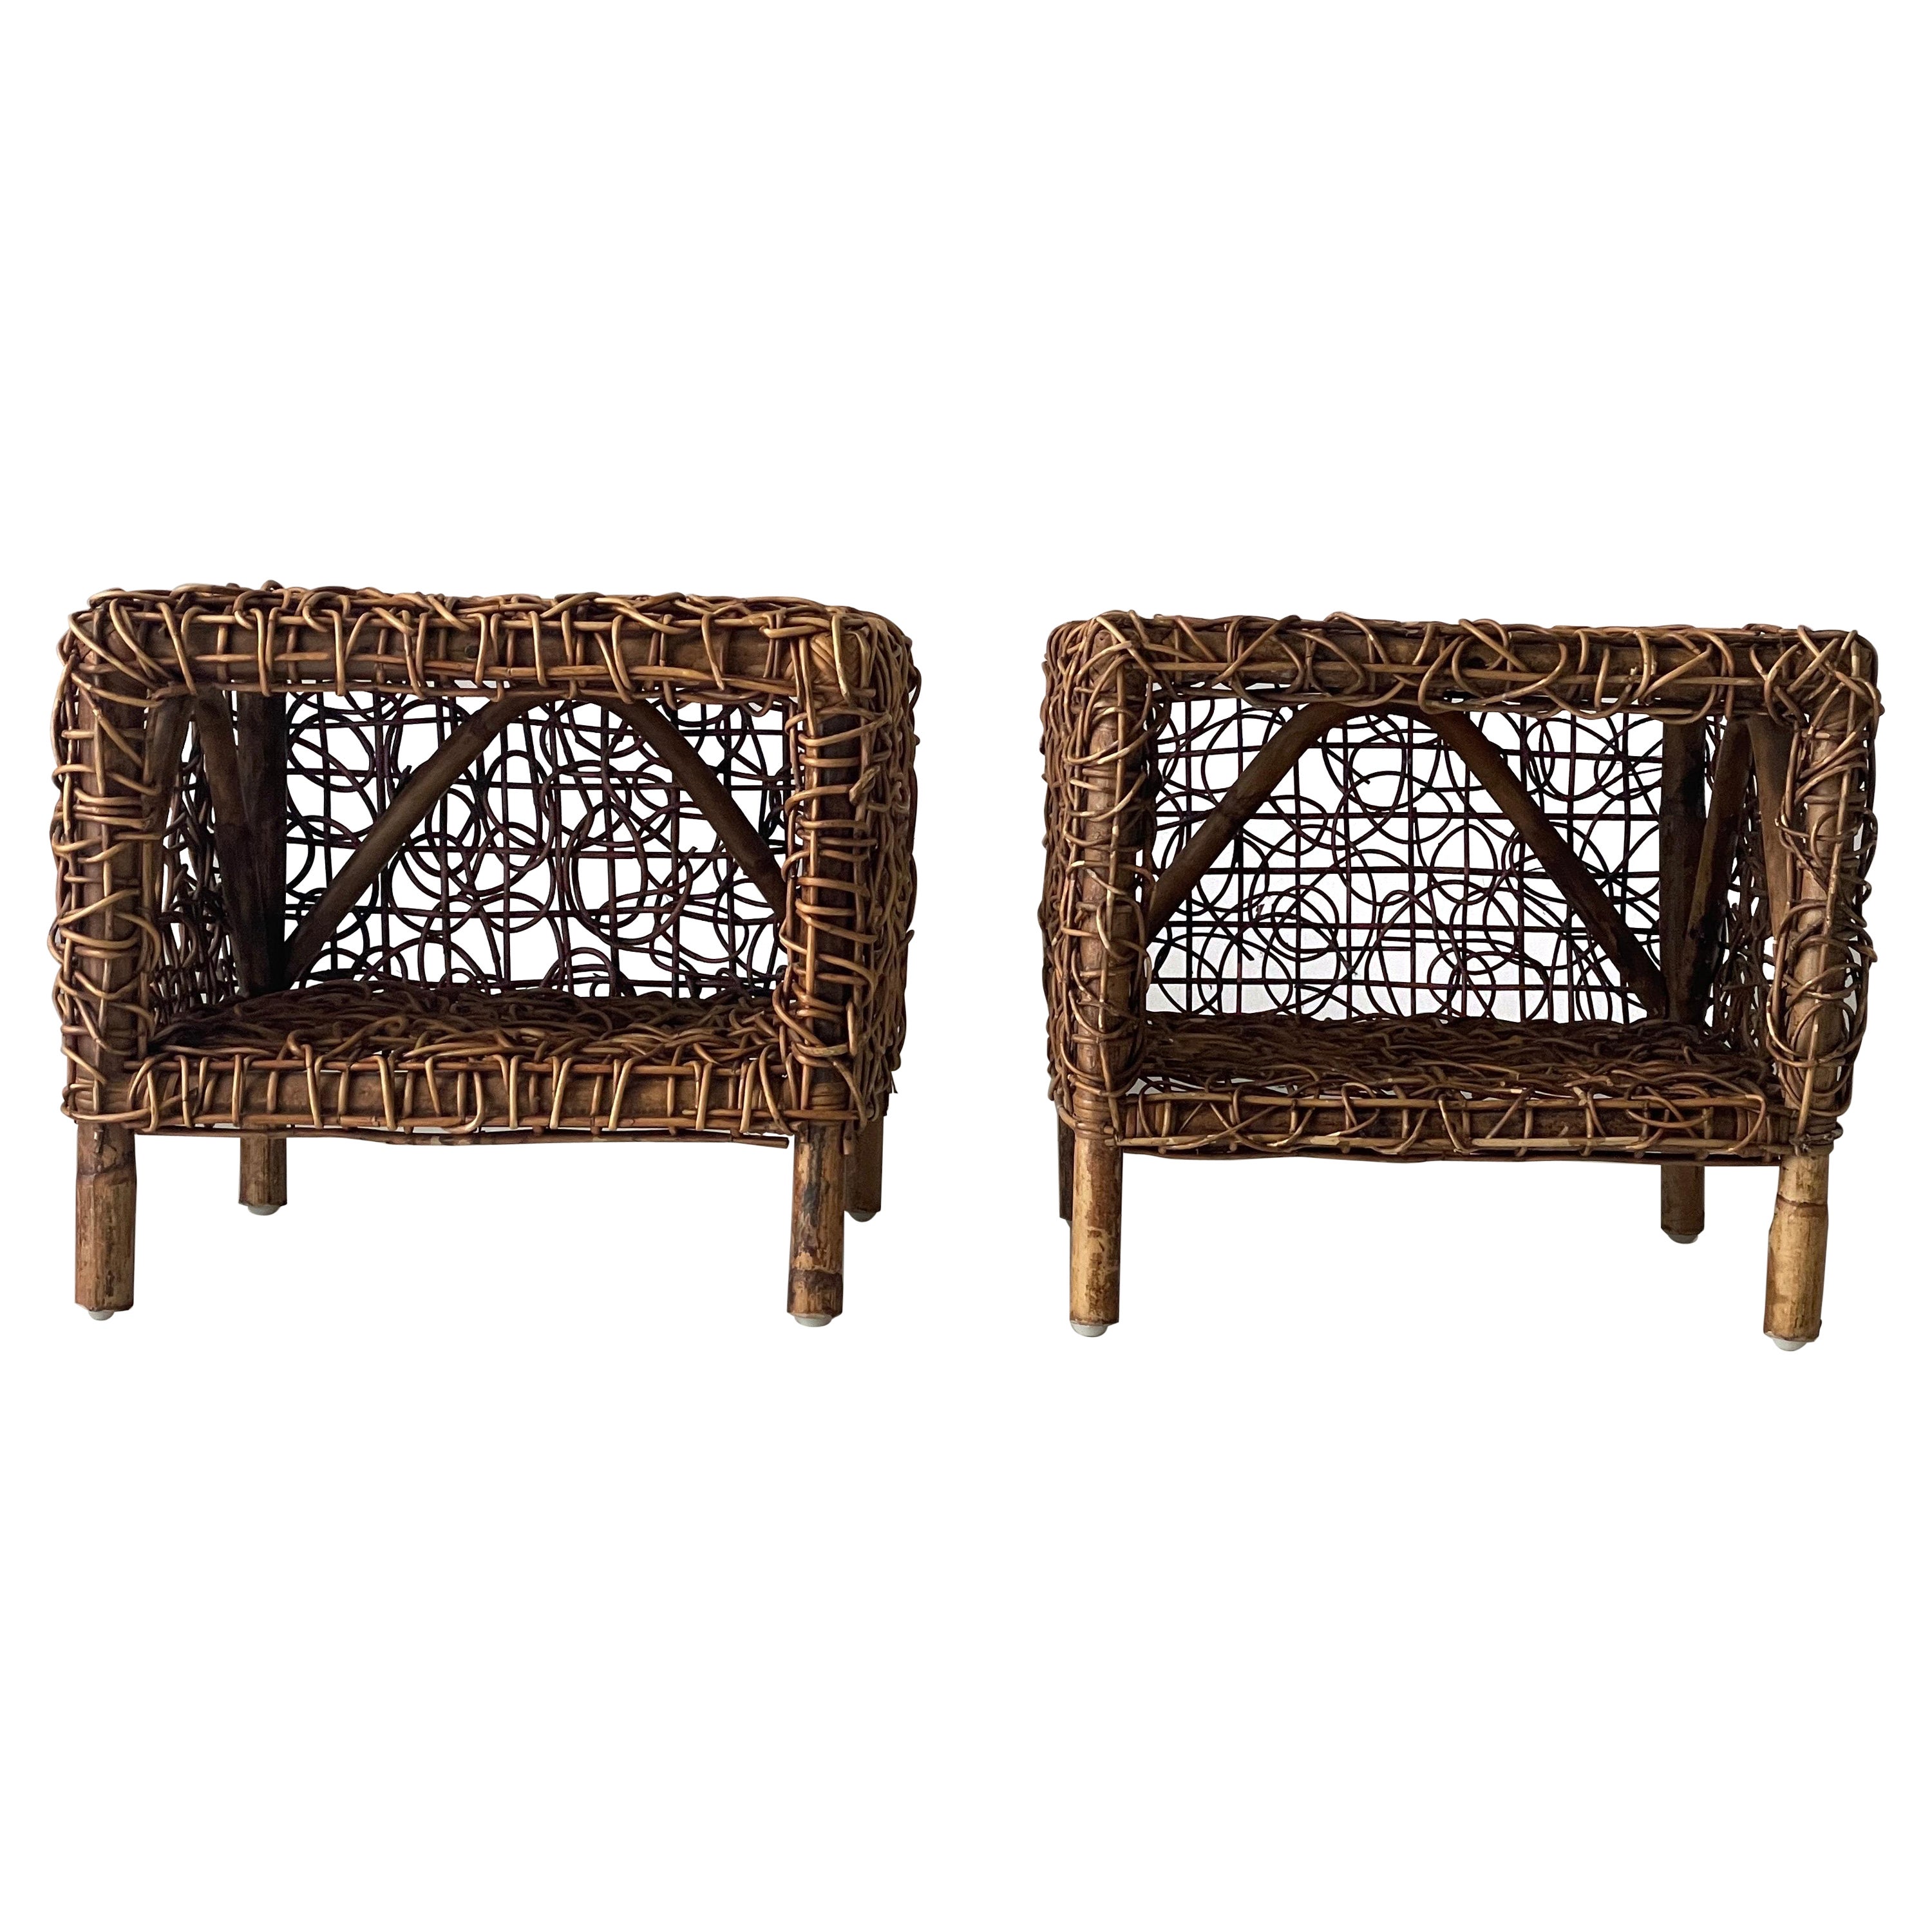 Unusual Design Woven Bamboo Pair of Bedside Tables, 1960s, Italy For Sale